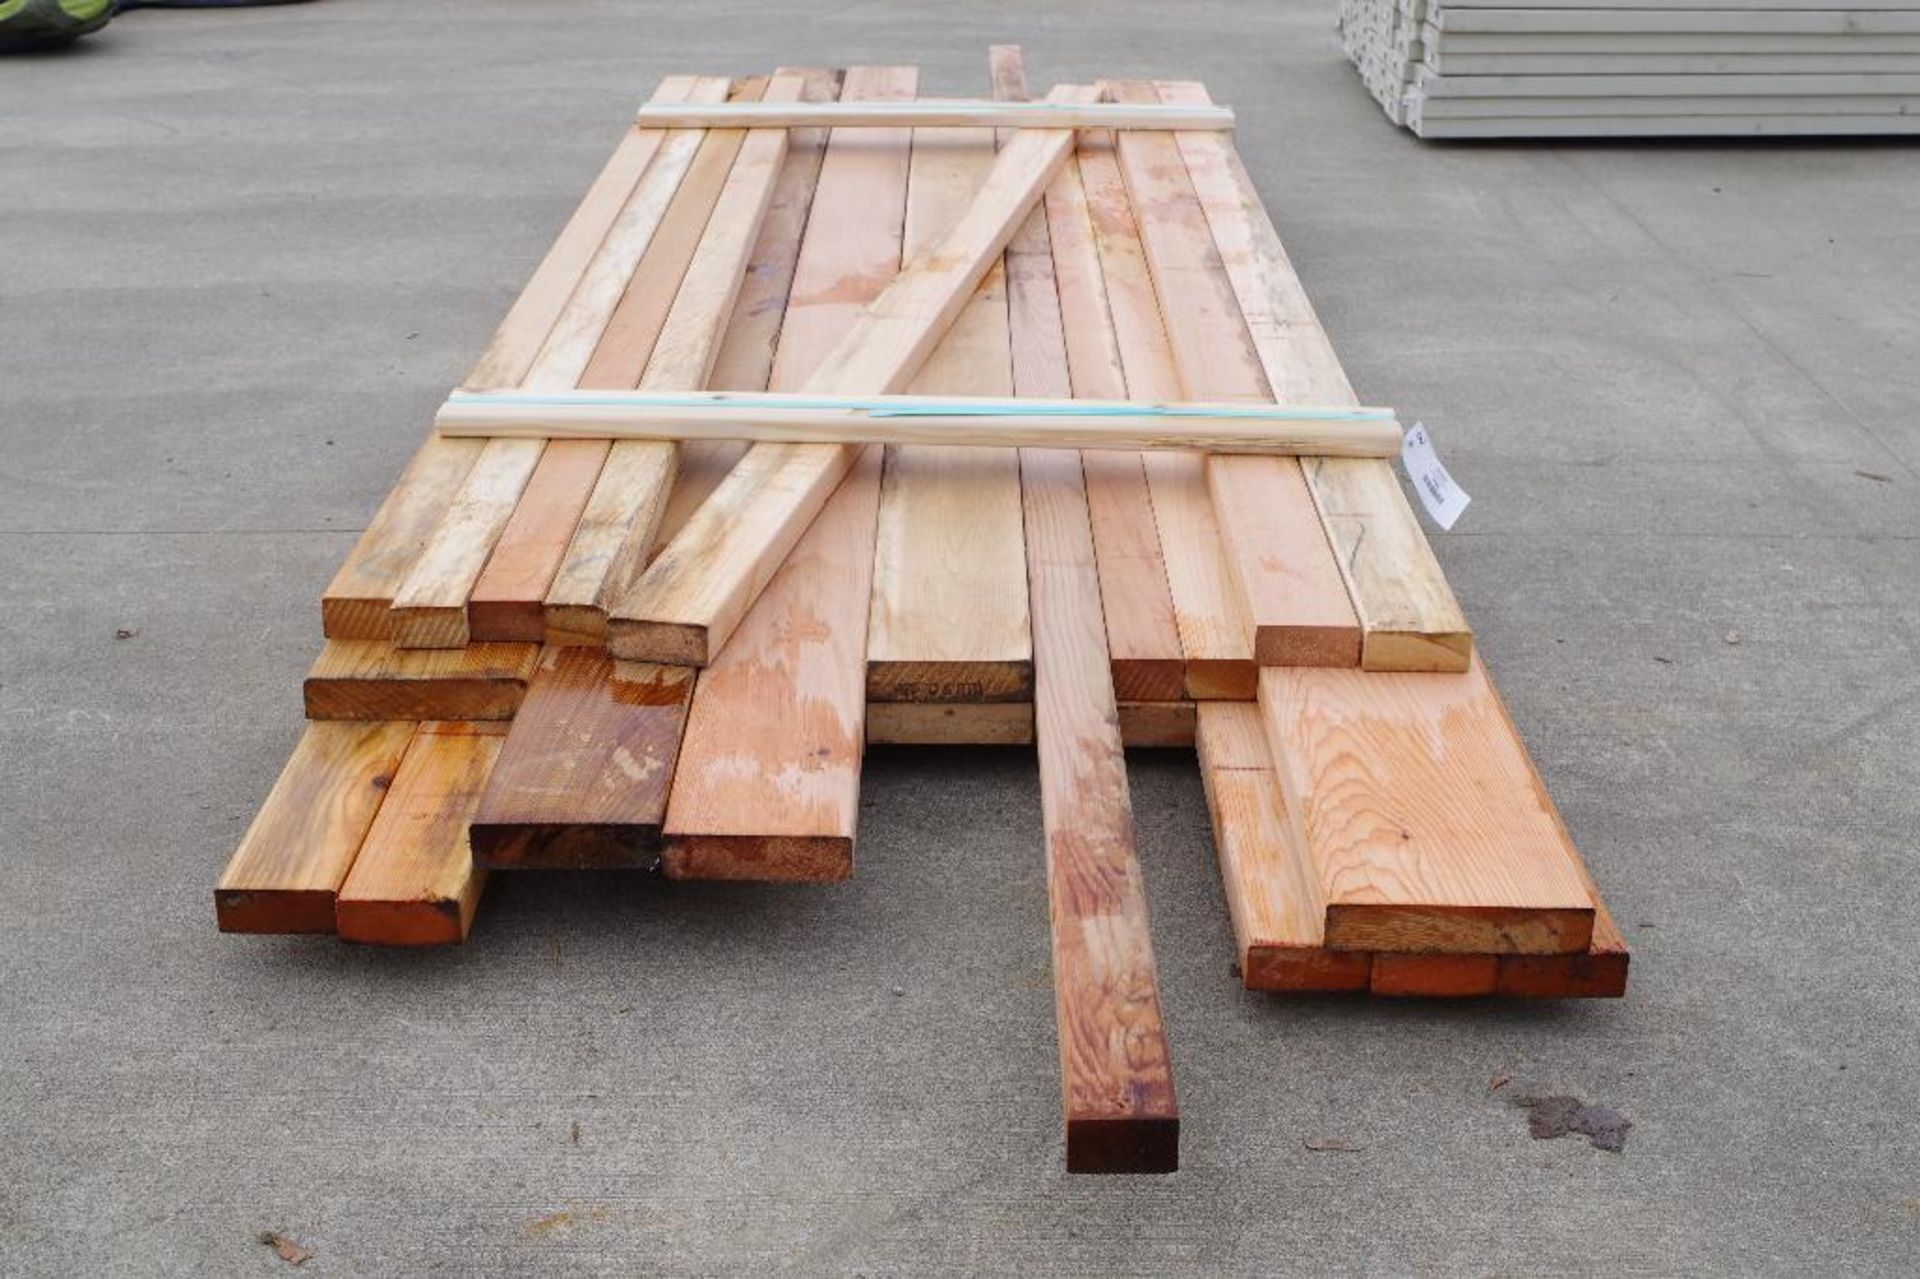 [QTY] Clear Cedar Boards, 2x8, 2x6's, 2x4's & 2x3's, Lengths up to 10' - Image 2 of 4